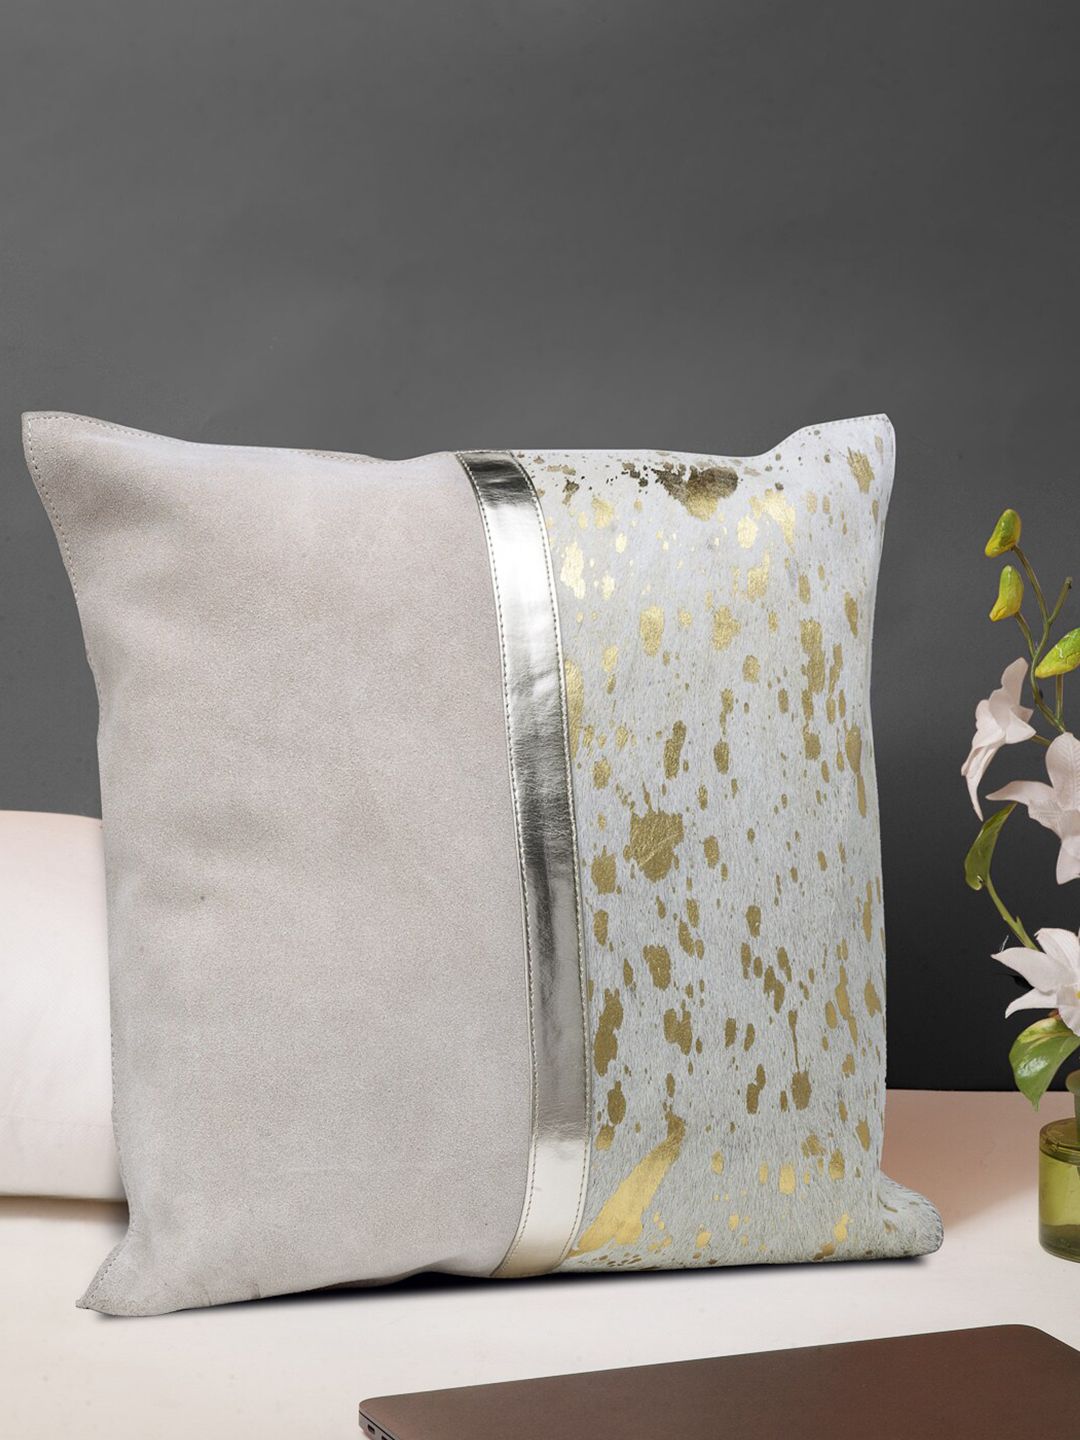 IMUR White & Gold-Toned Leather Square Cushion Covers Price in India